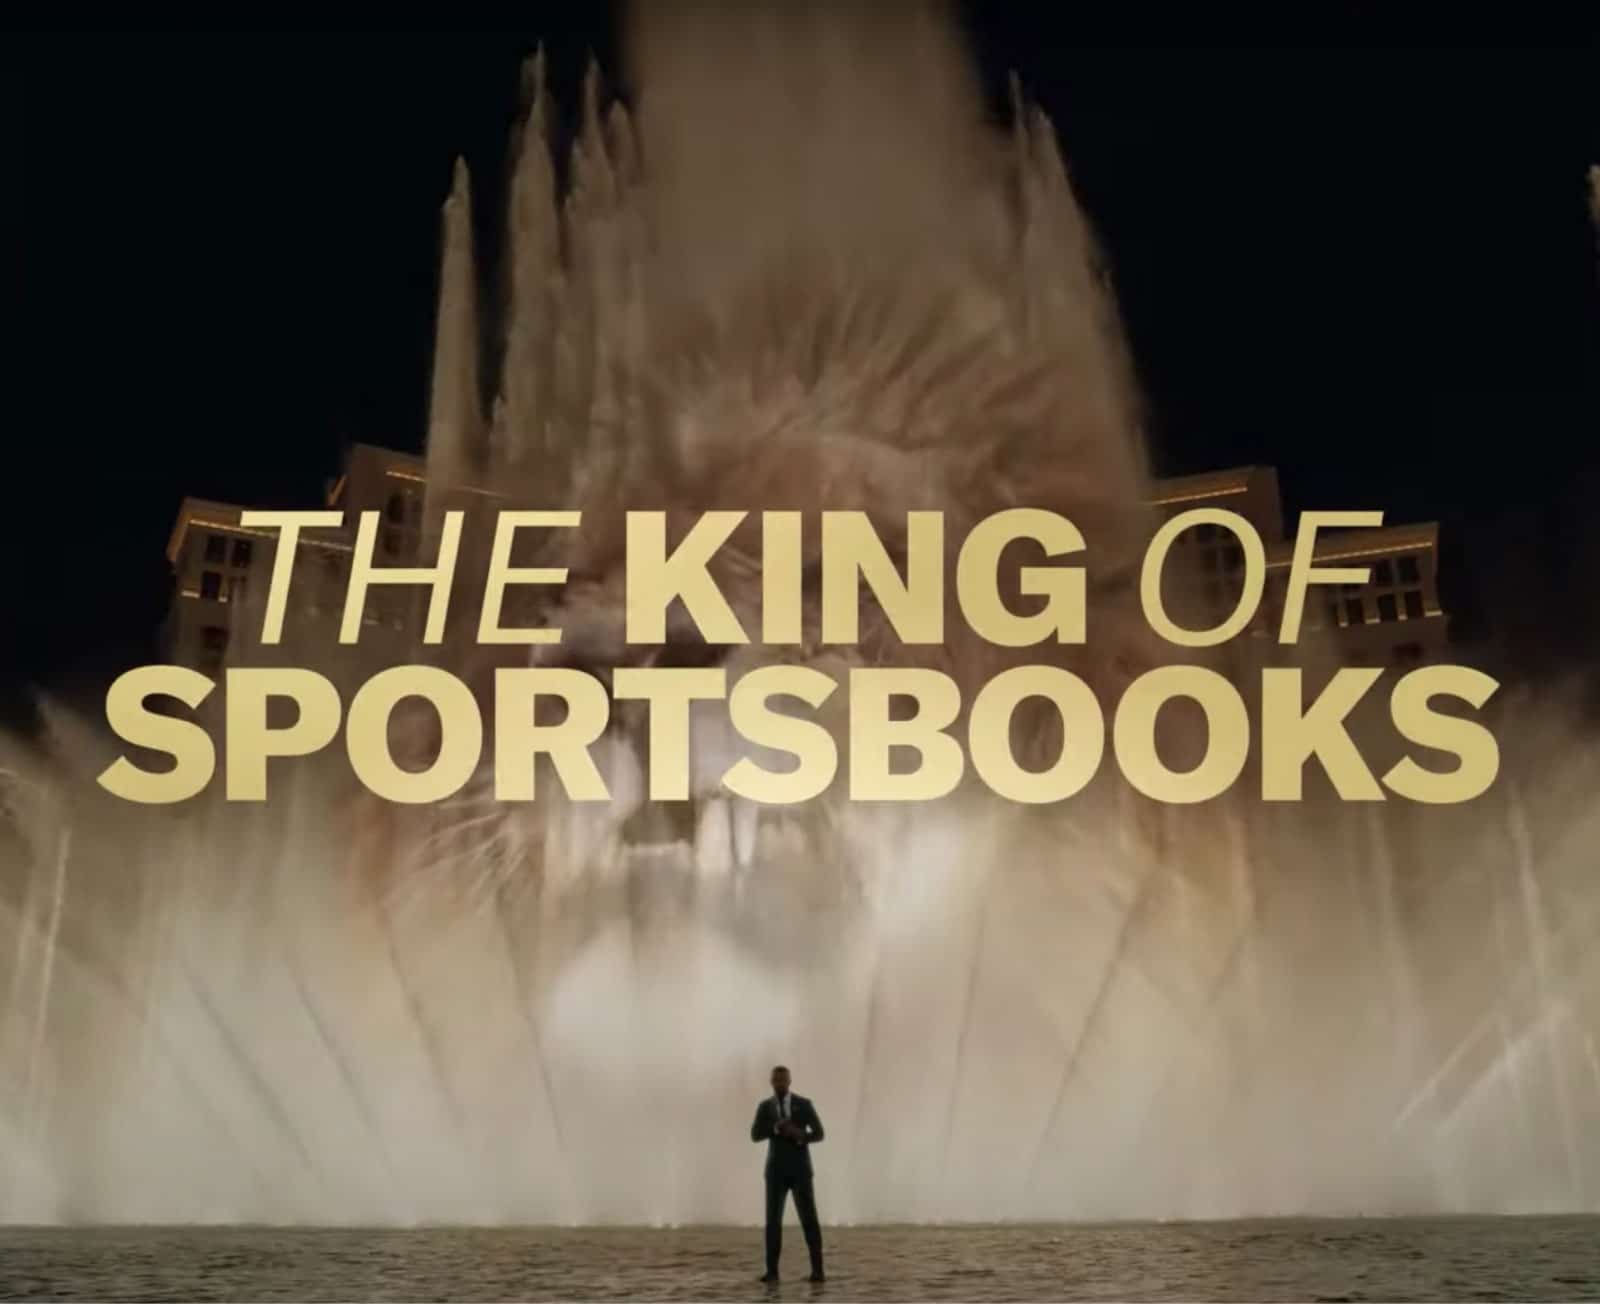 bet mgm Image - the King of Sportsbooks